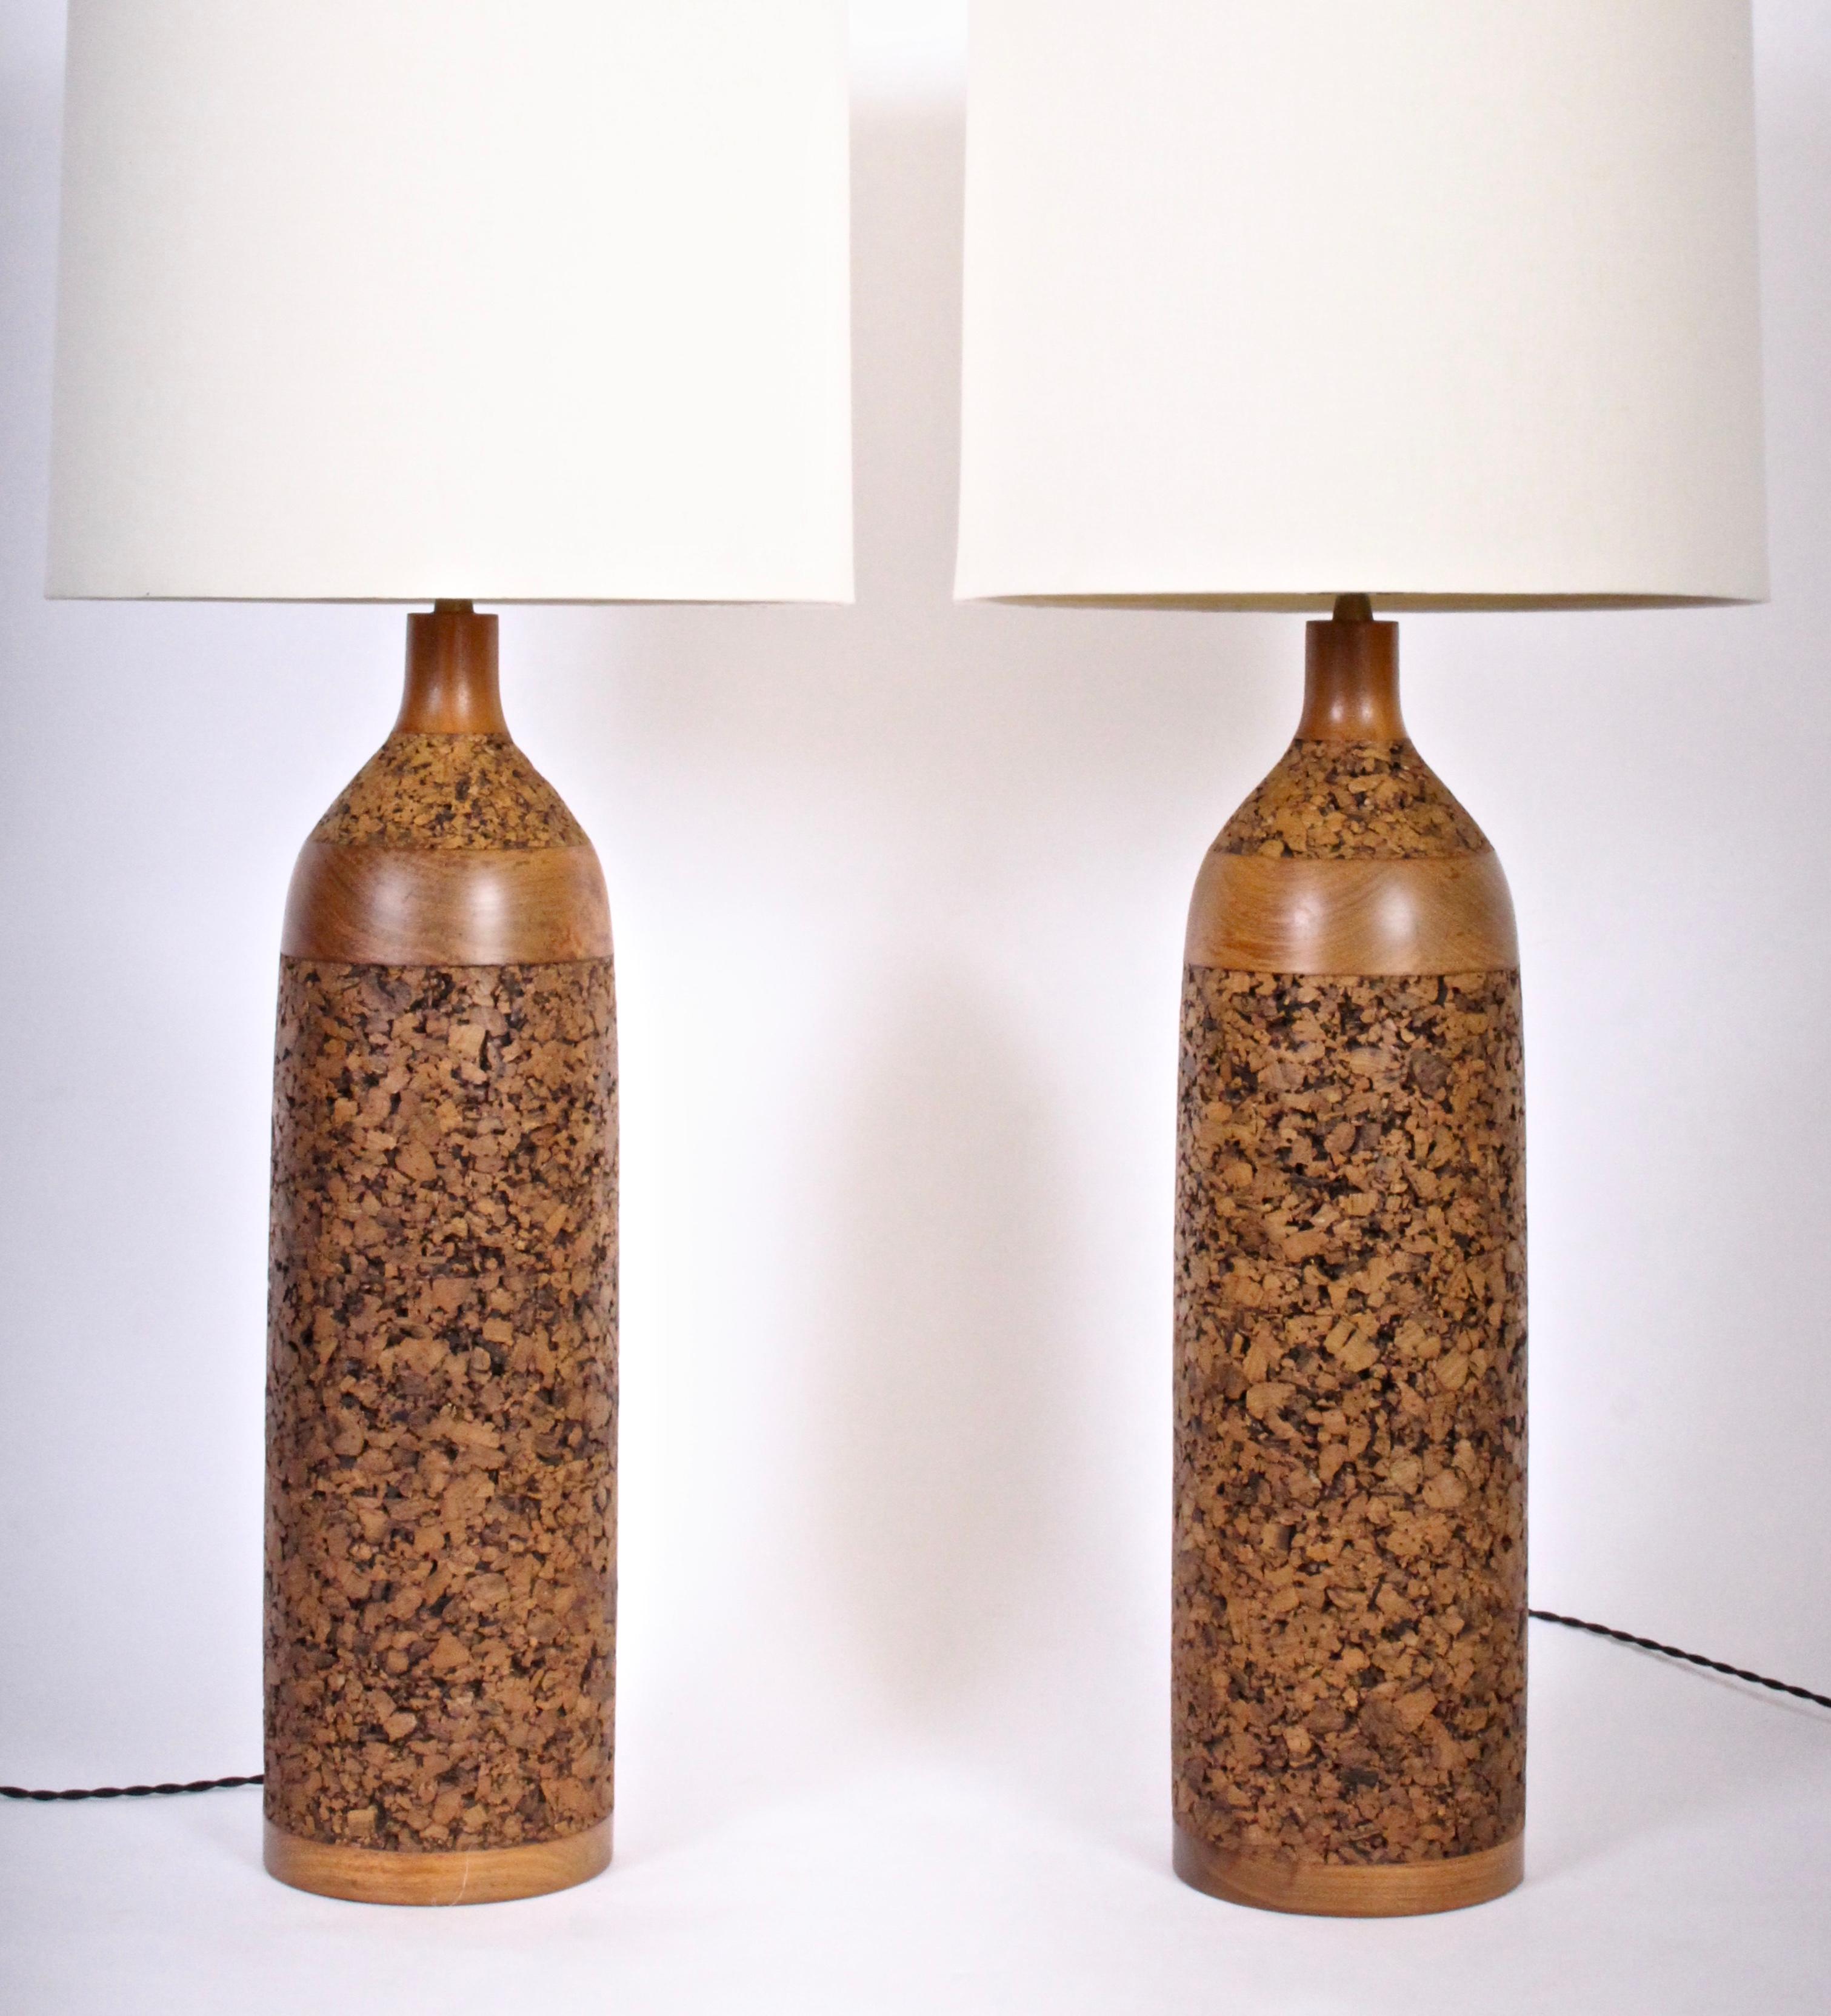 Slender American Mid Century three foot high pair of Walnut and Cork Table Lamps, 1960's. Featuring contoured Cork bottle forms with turned Walnut details. Small footprint. Shades shown for display only (11H x 13.5 D top x 14 D bottom). 36 H with